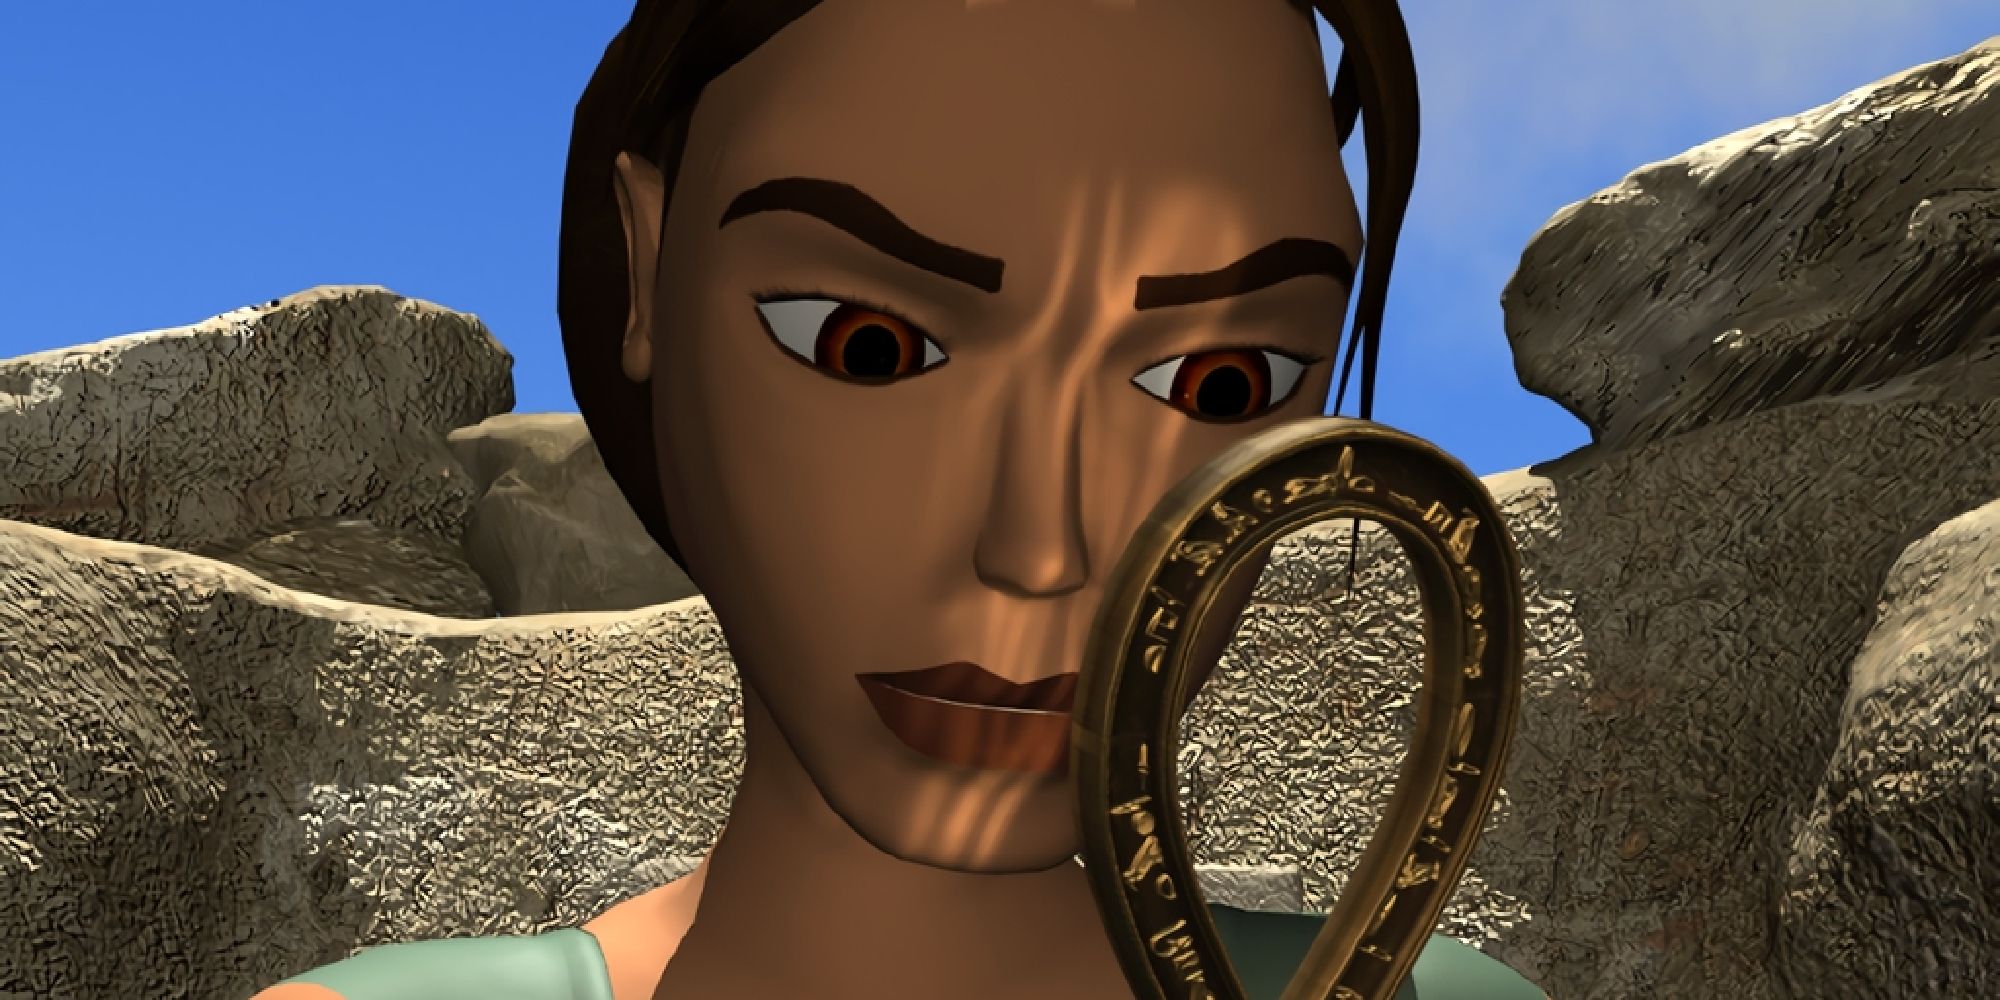 Lara staring at the Amulet of Horus outside in Egypt in Tomb Raider 4